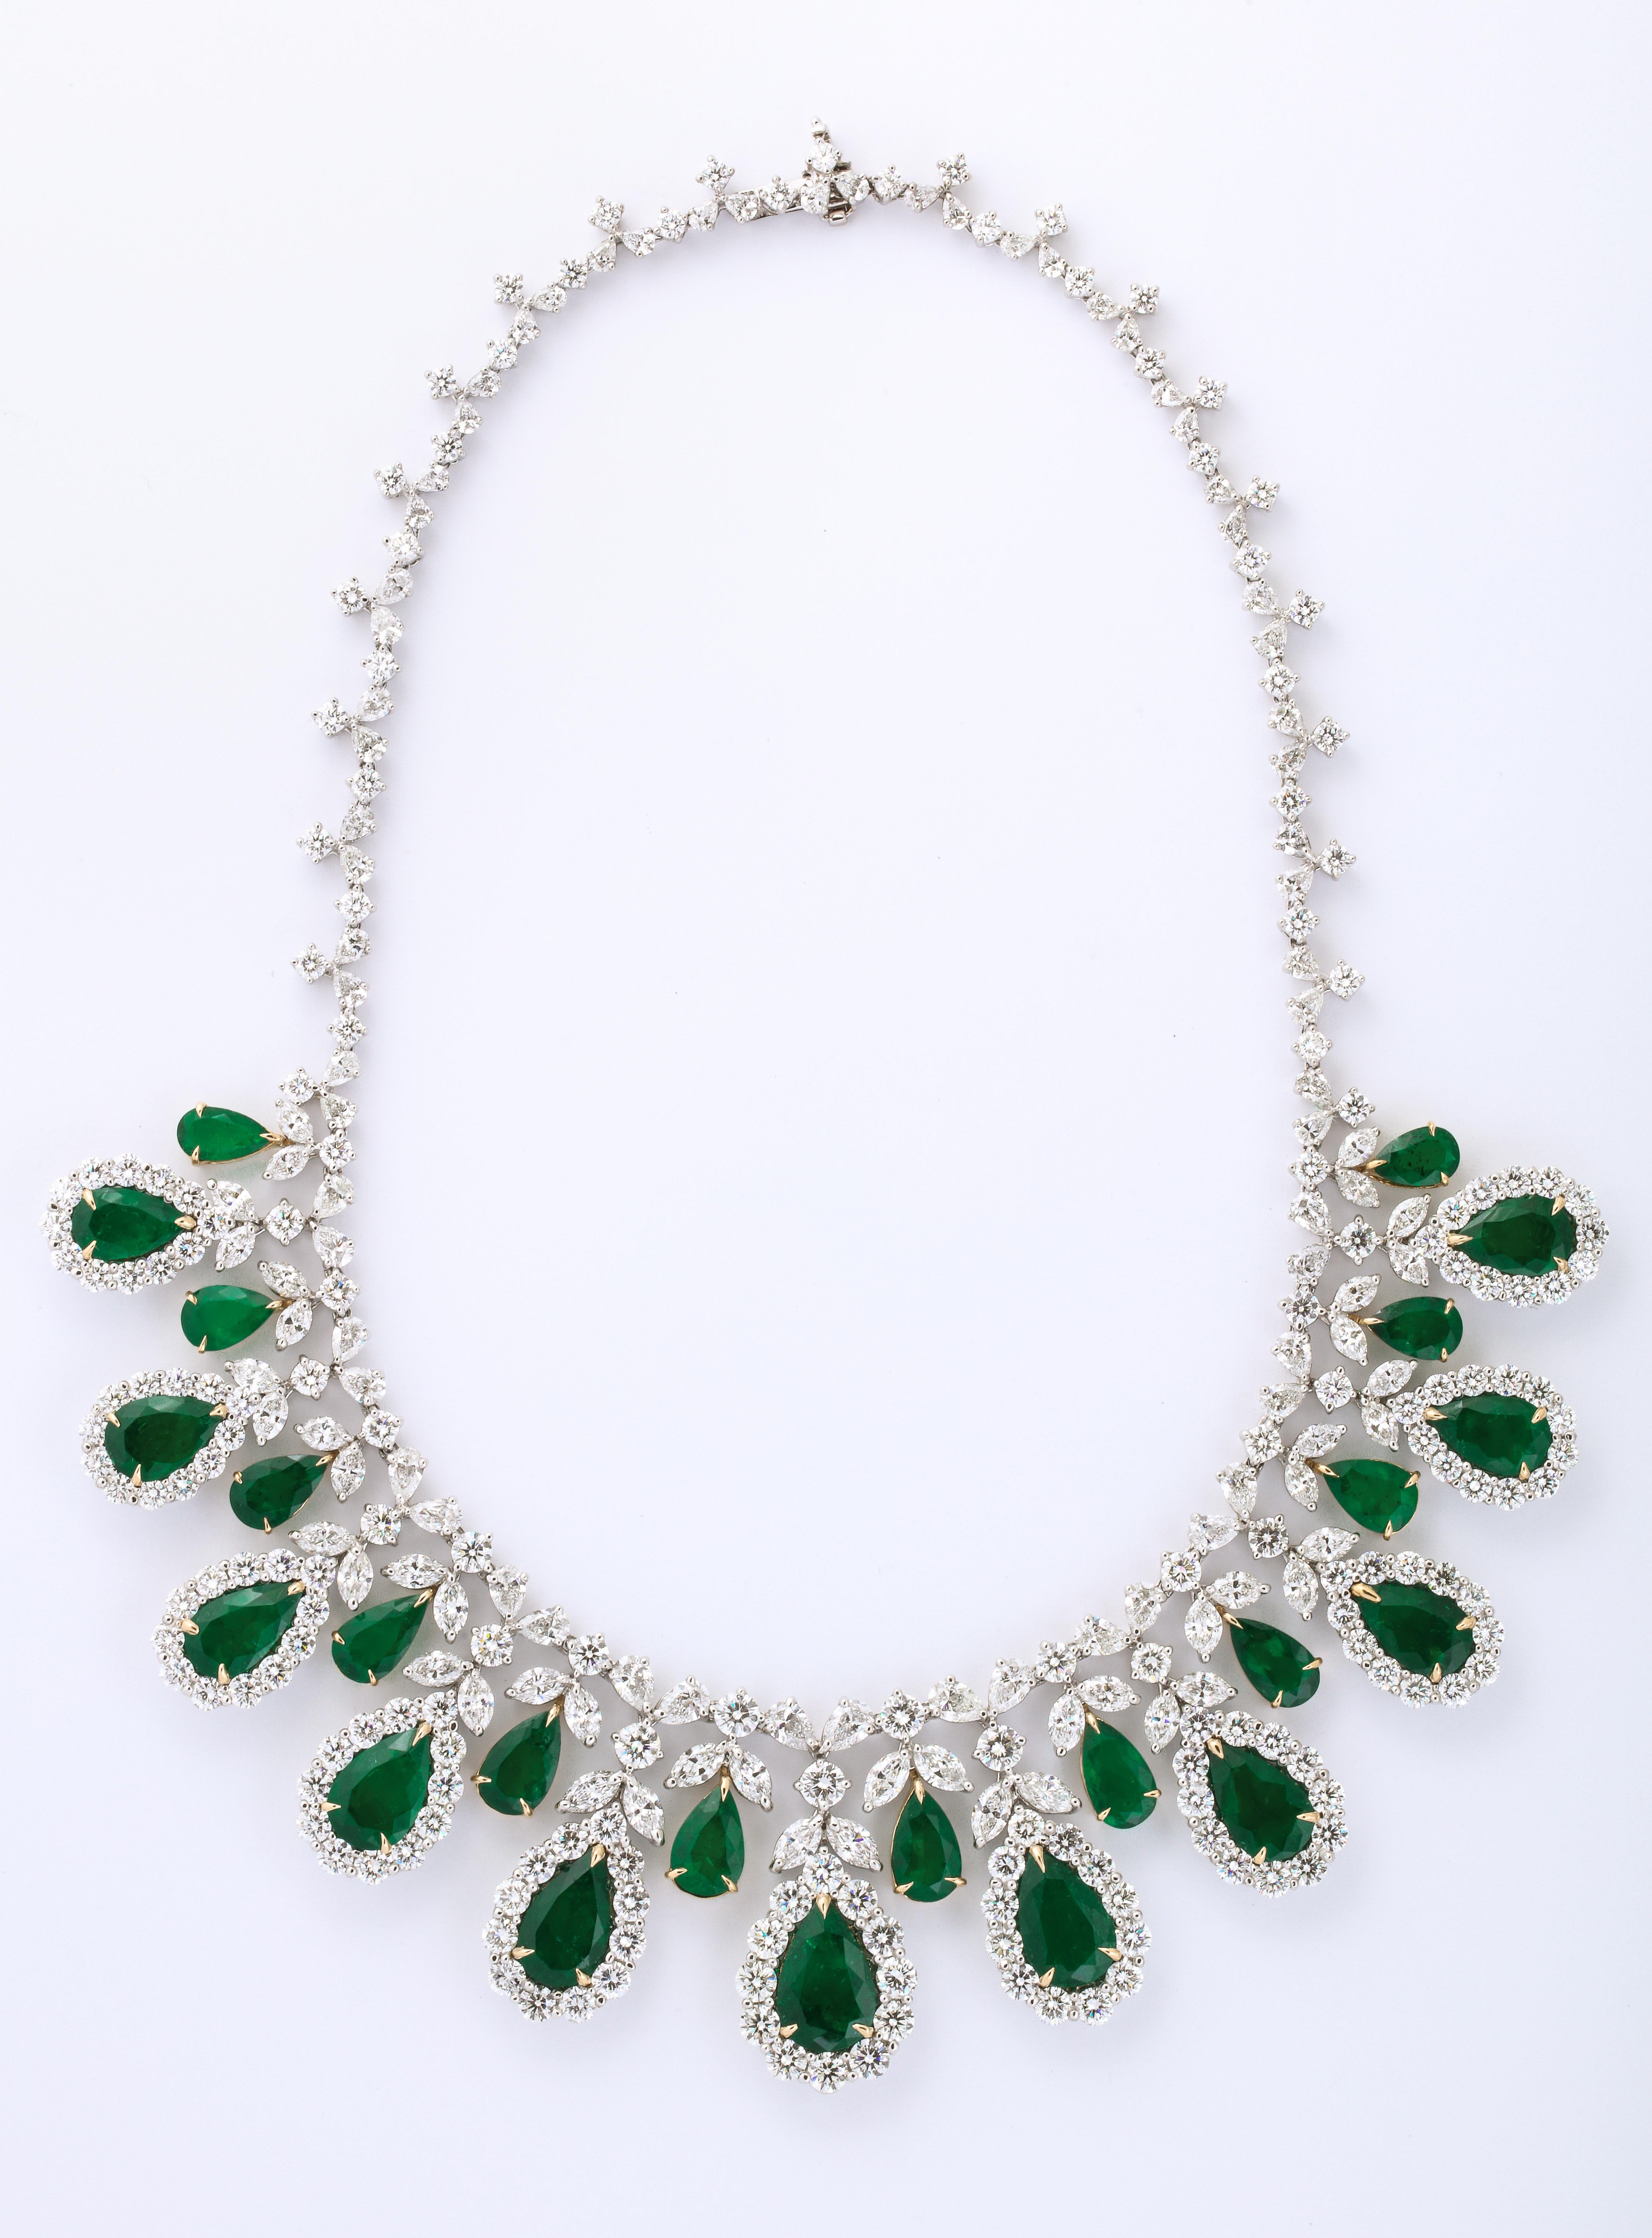 
Important Colombian Emerald and Diamond Drop Necklace 

45.85 carats of Intense to Vivid Green Colombian pear shaped emeralds 

63.02 carats of colorless white pear, round and marquise cut diamonds. 

Set in platinum 

16 inch length 

Certified by